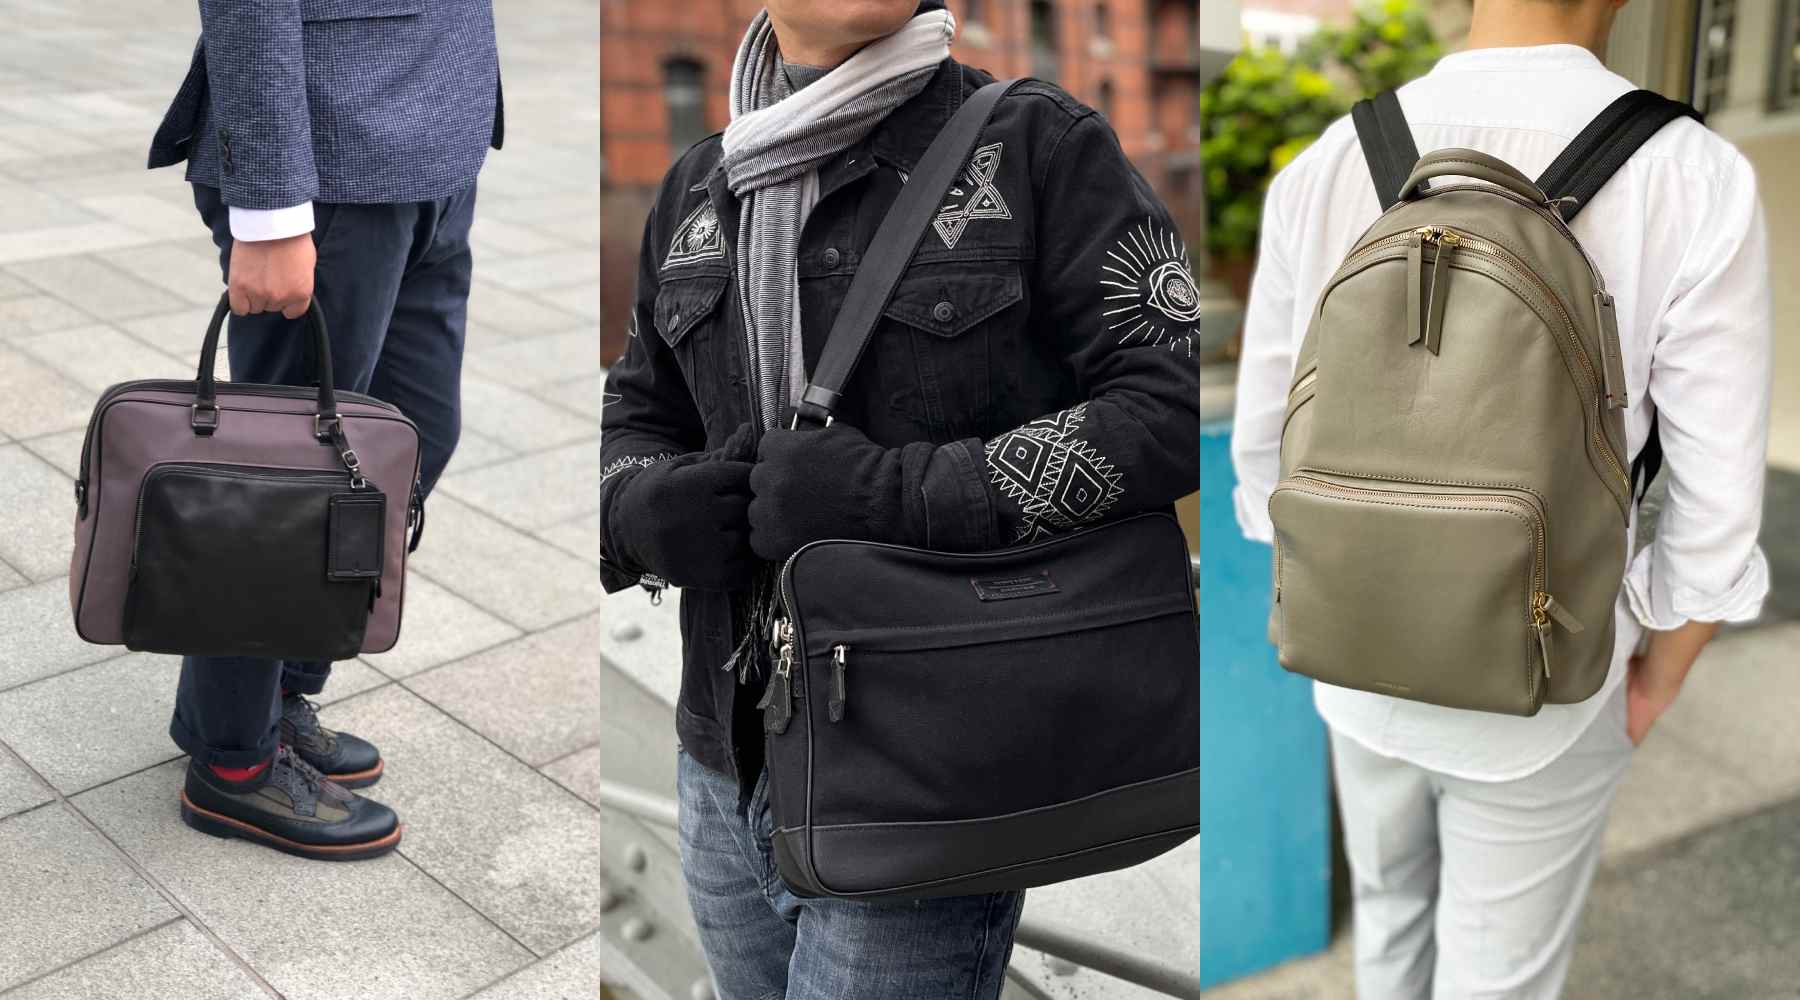  Best Men’s Work Bag for Your Personality